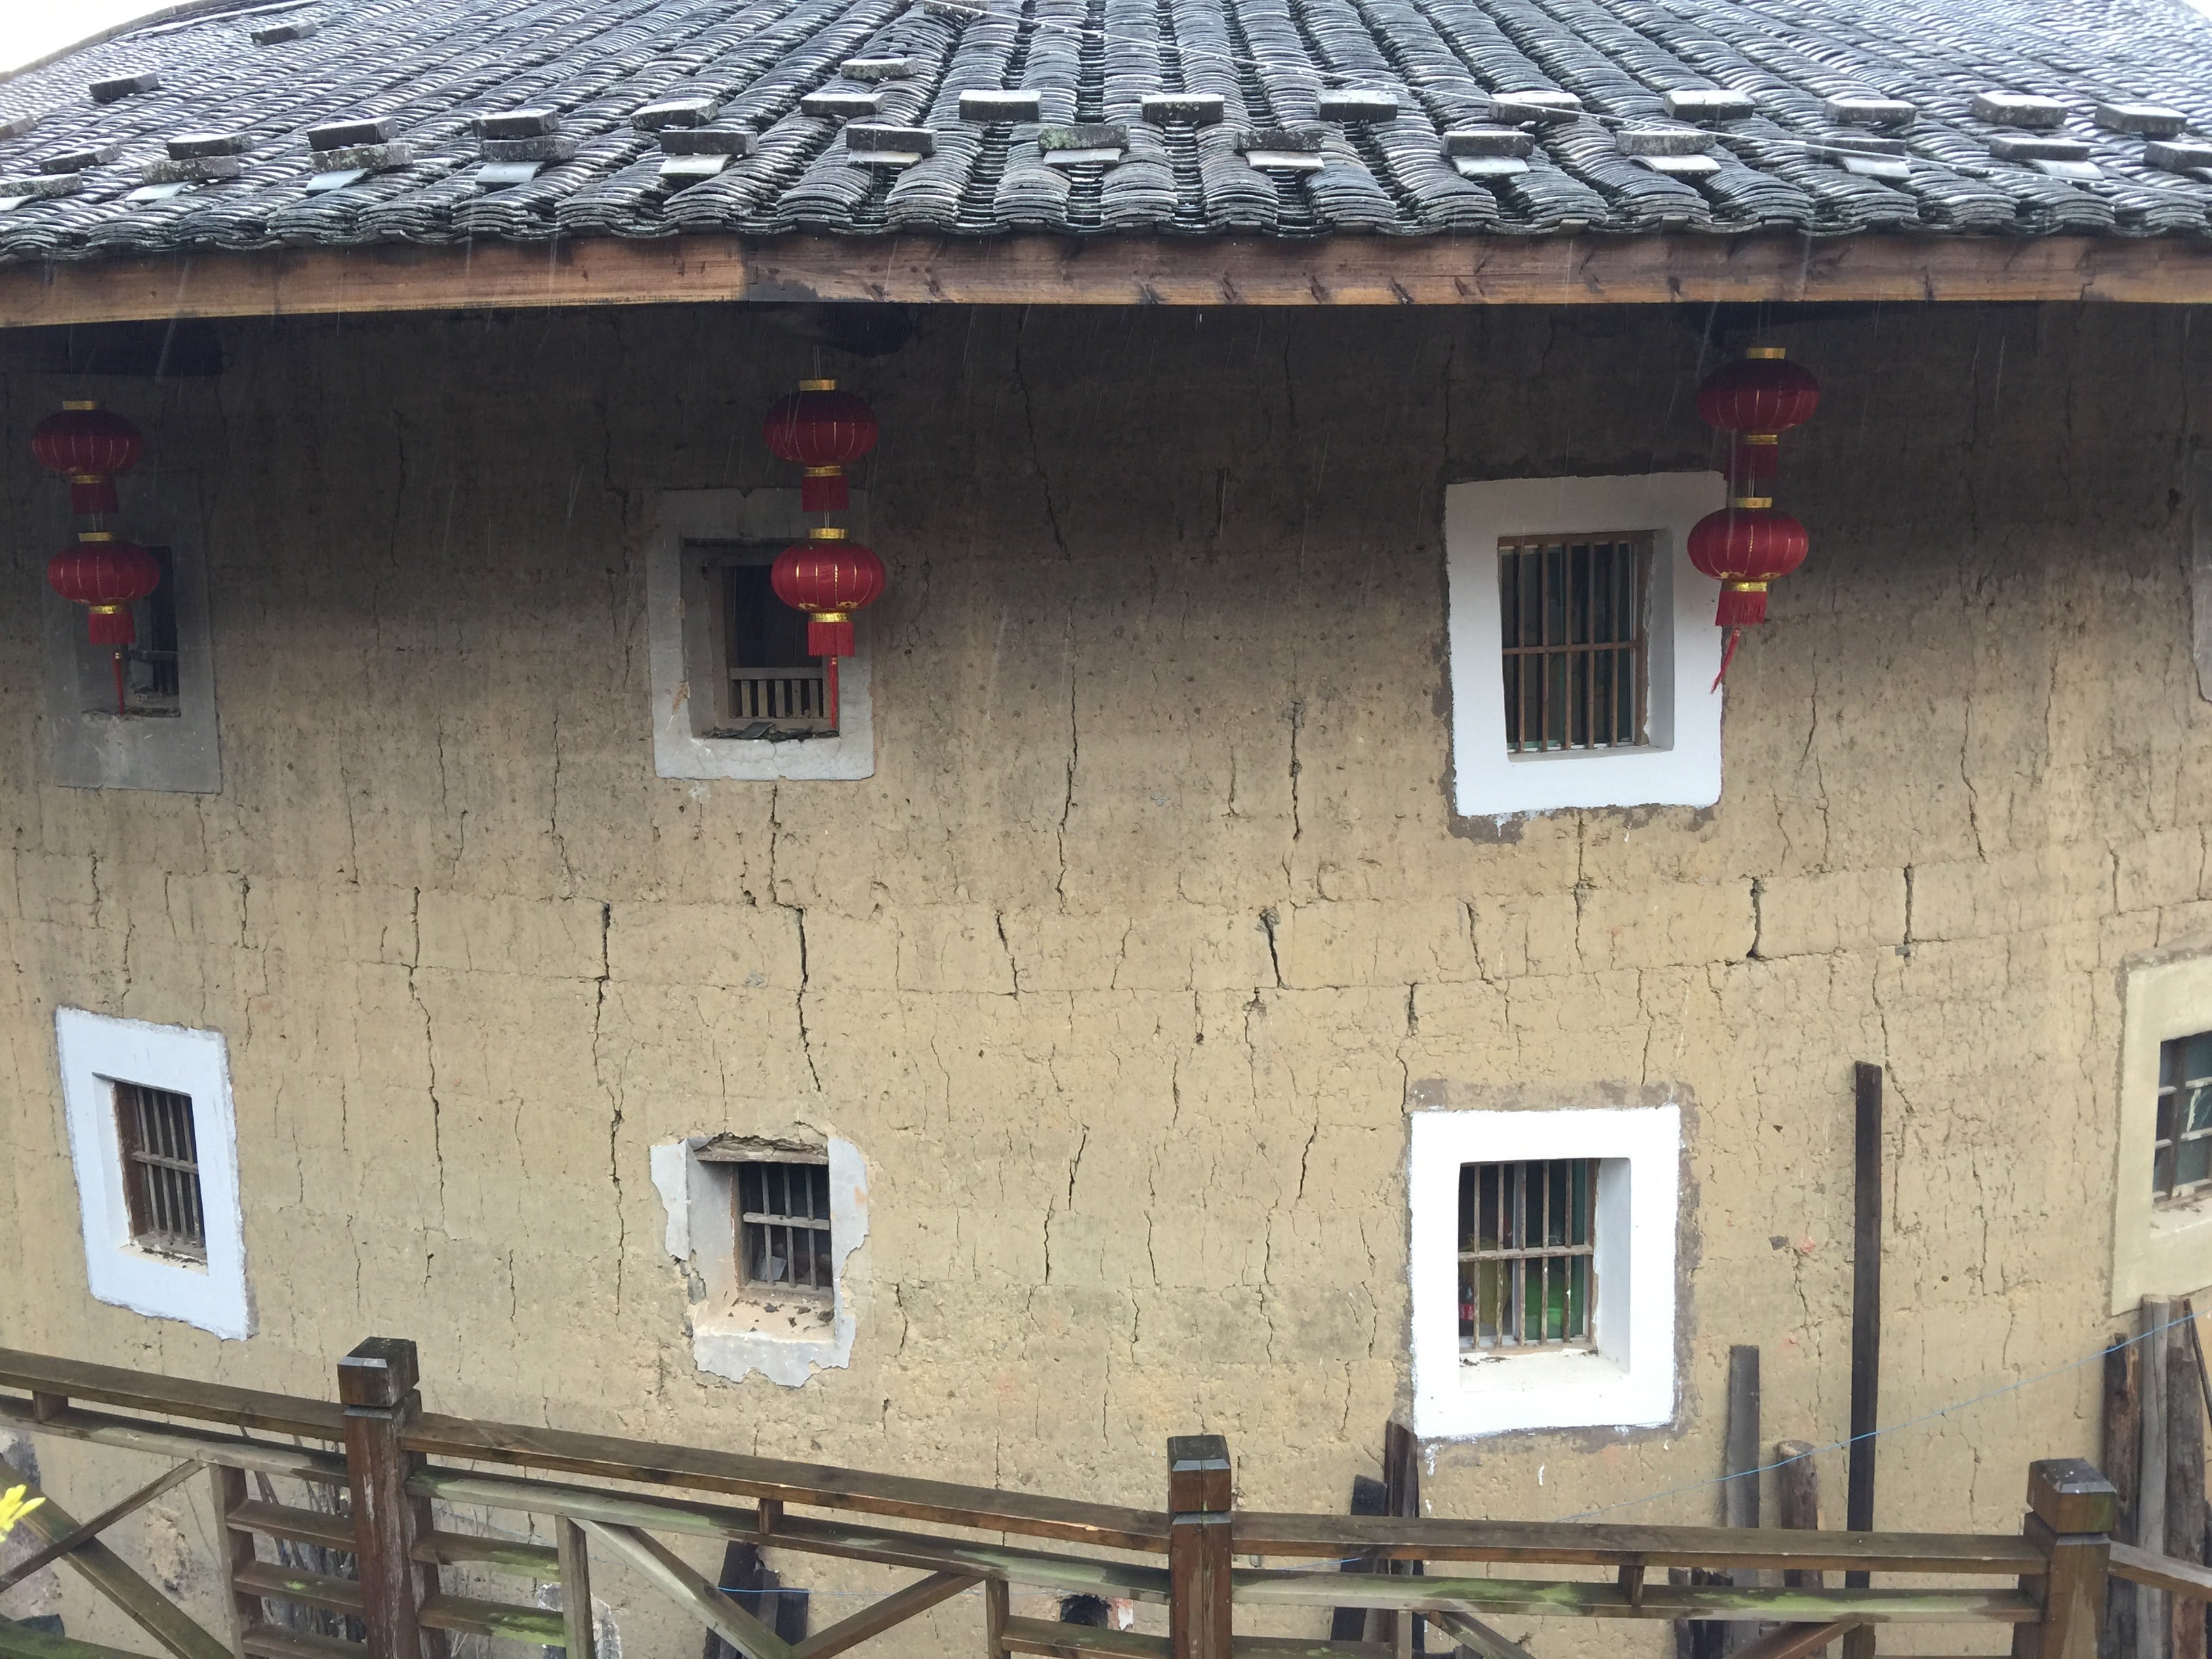 Windows of the round house of China